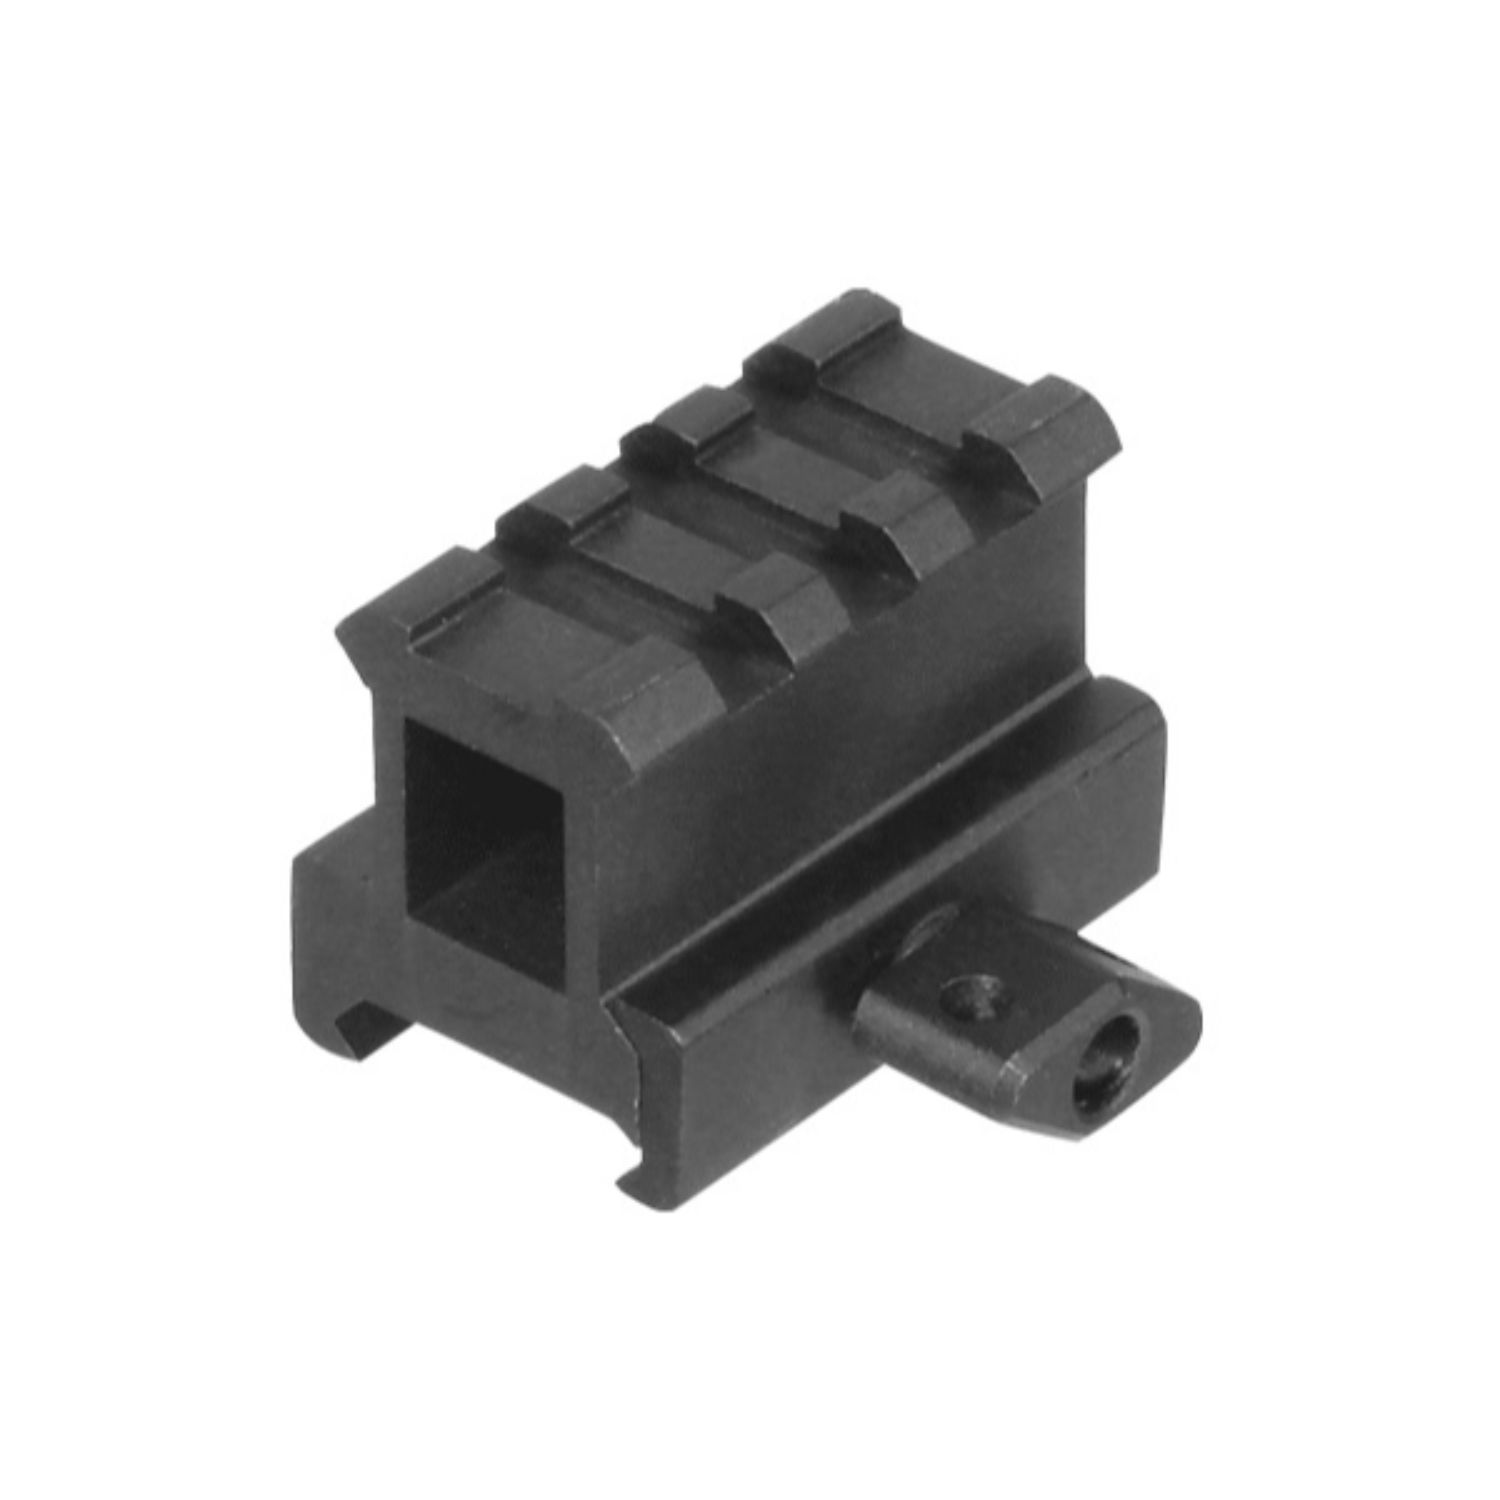 Leapers UTG Hi-Profile Compact Riser Mount 1in High 3 Slot